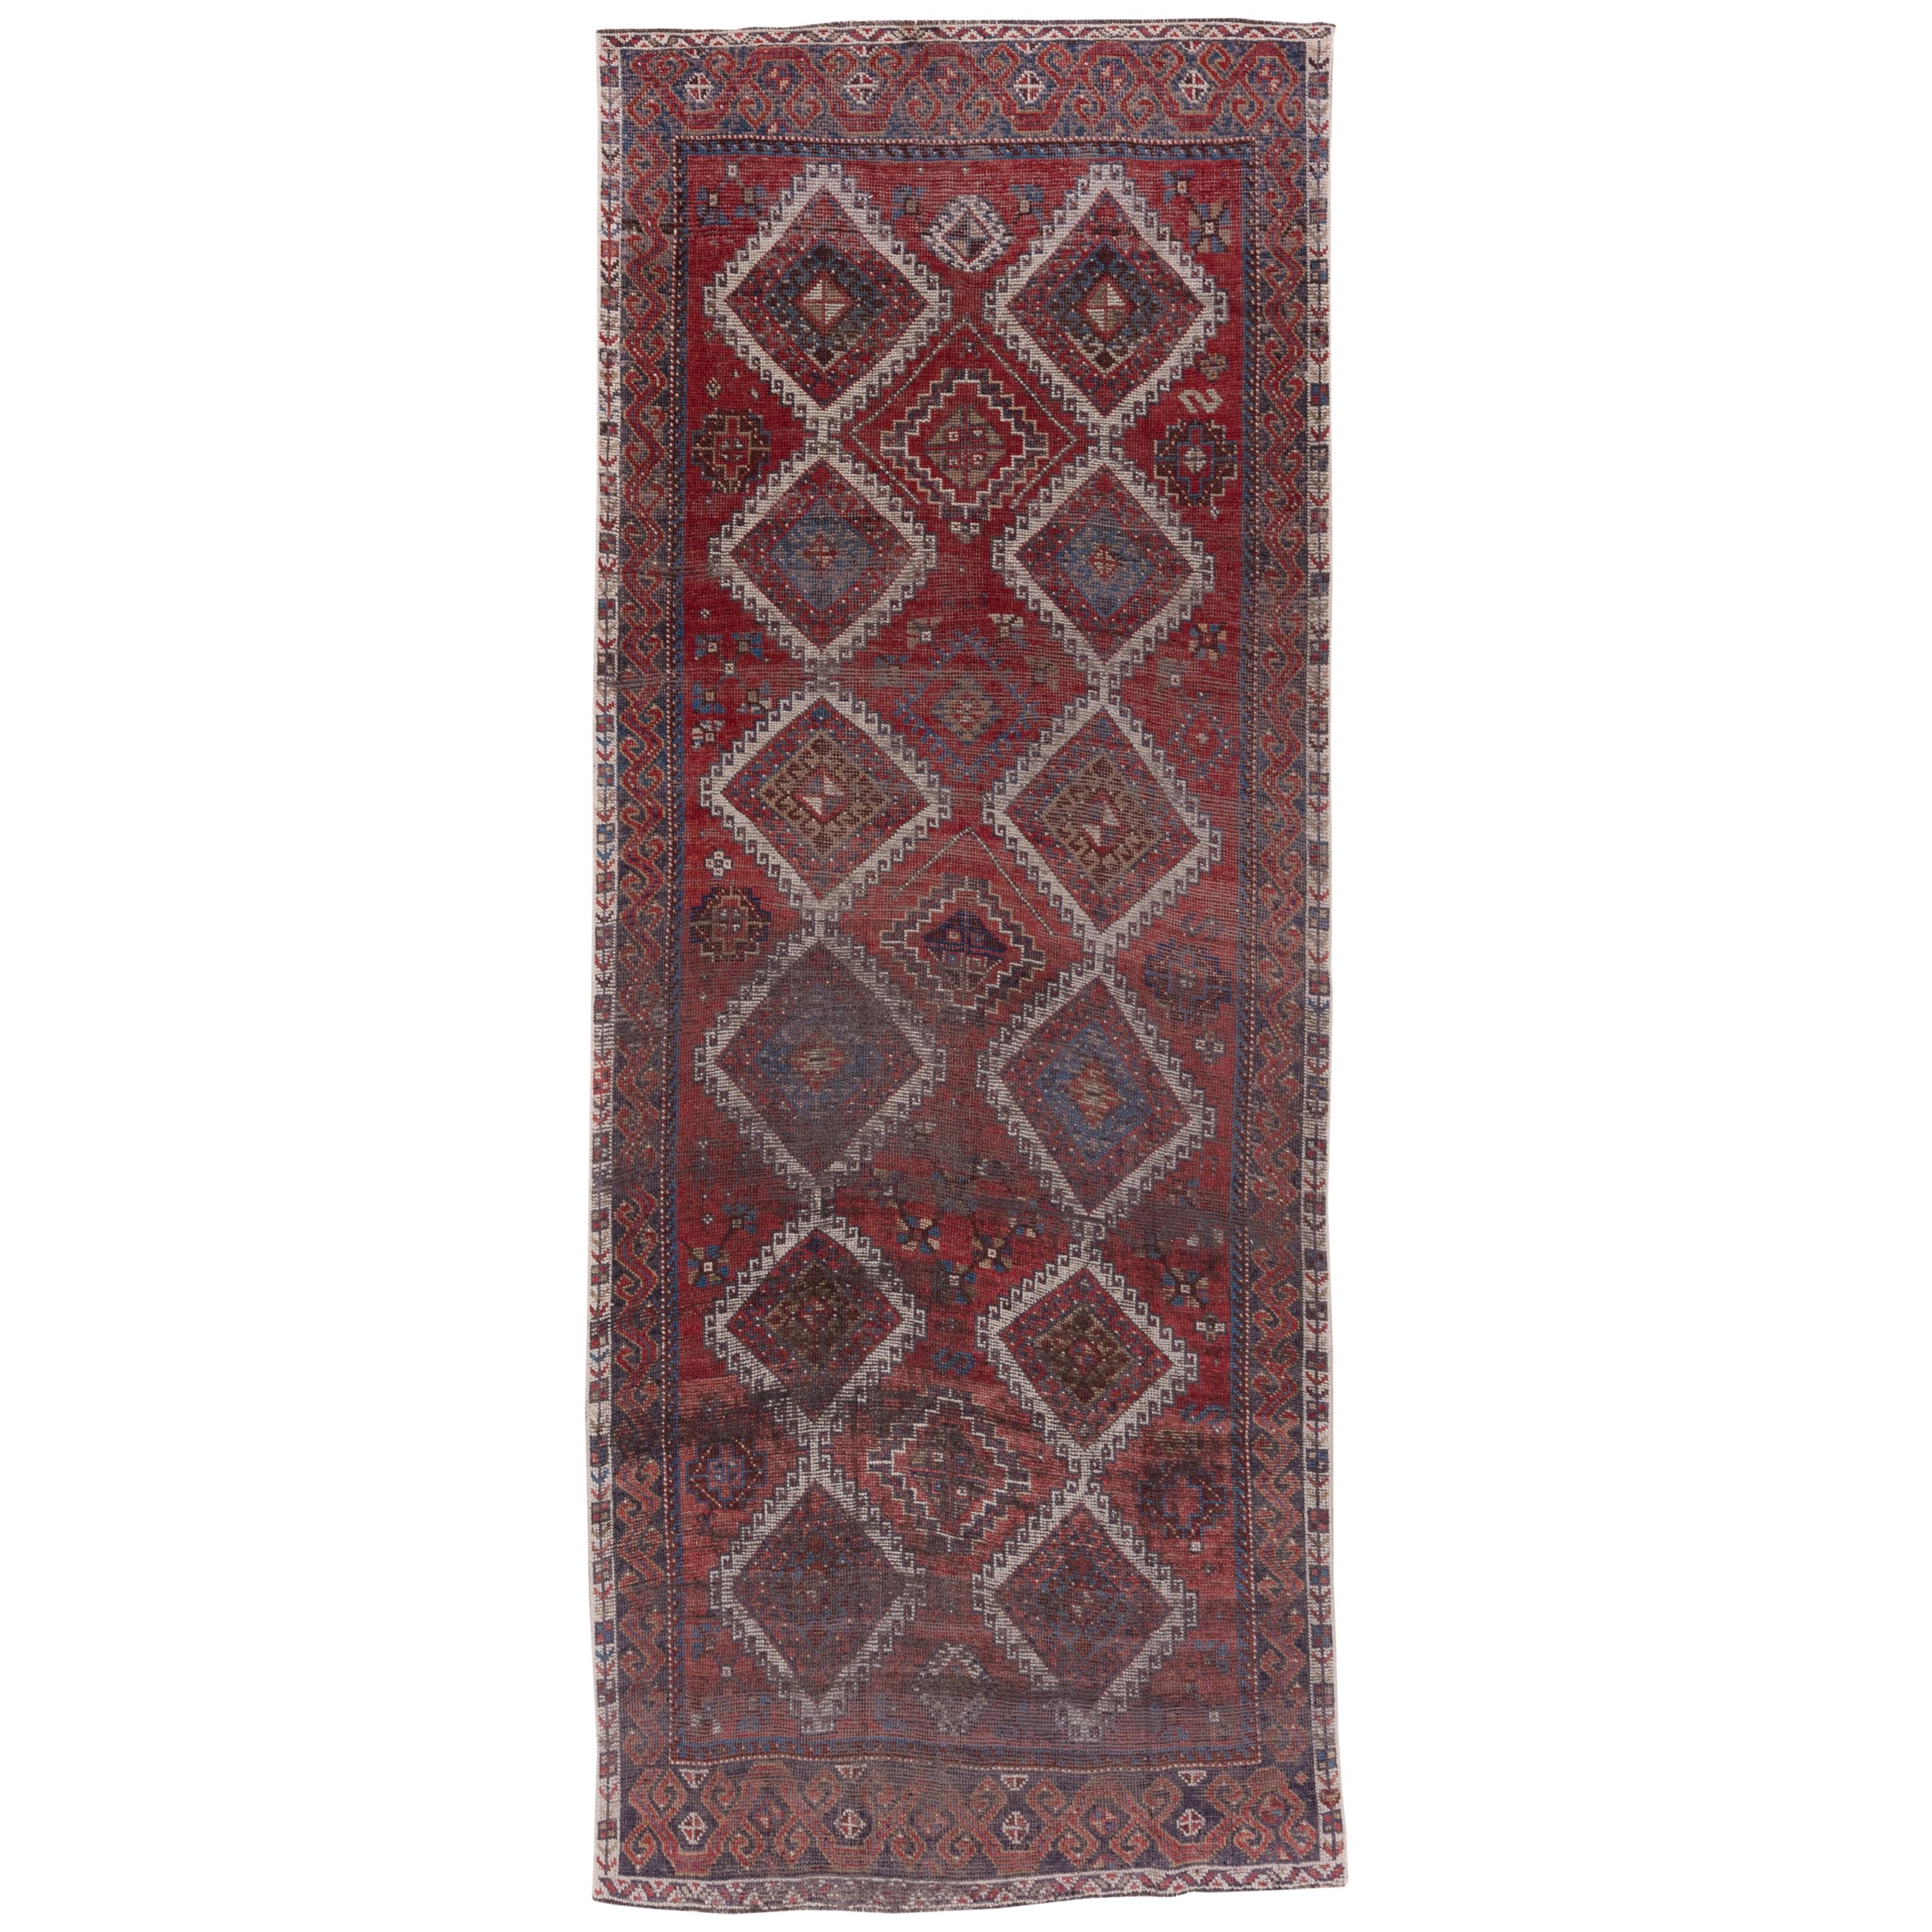 Antique Oushak Wide Runner, Shiny Red All-Over Diamond Field, Lightly Distressed